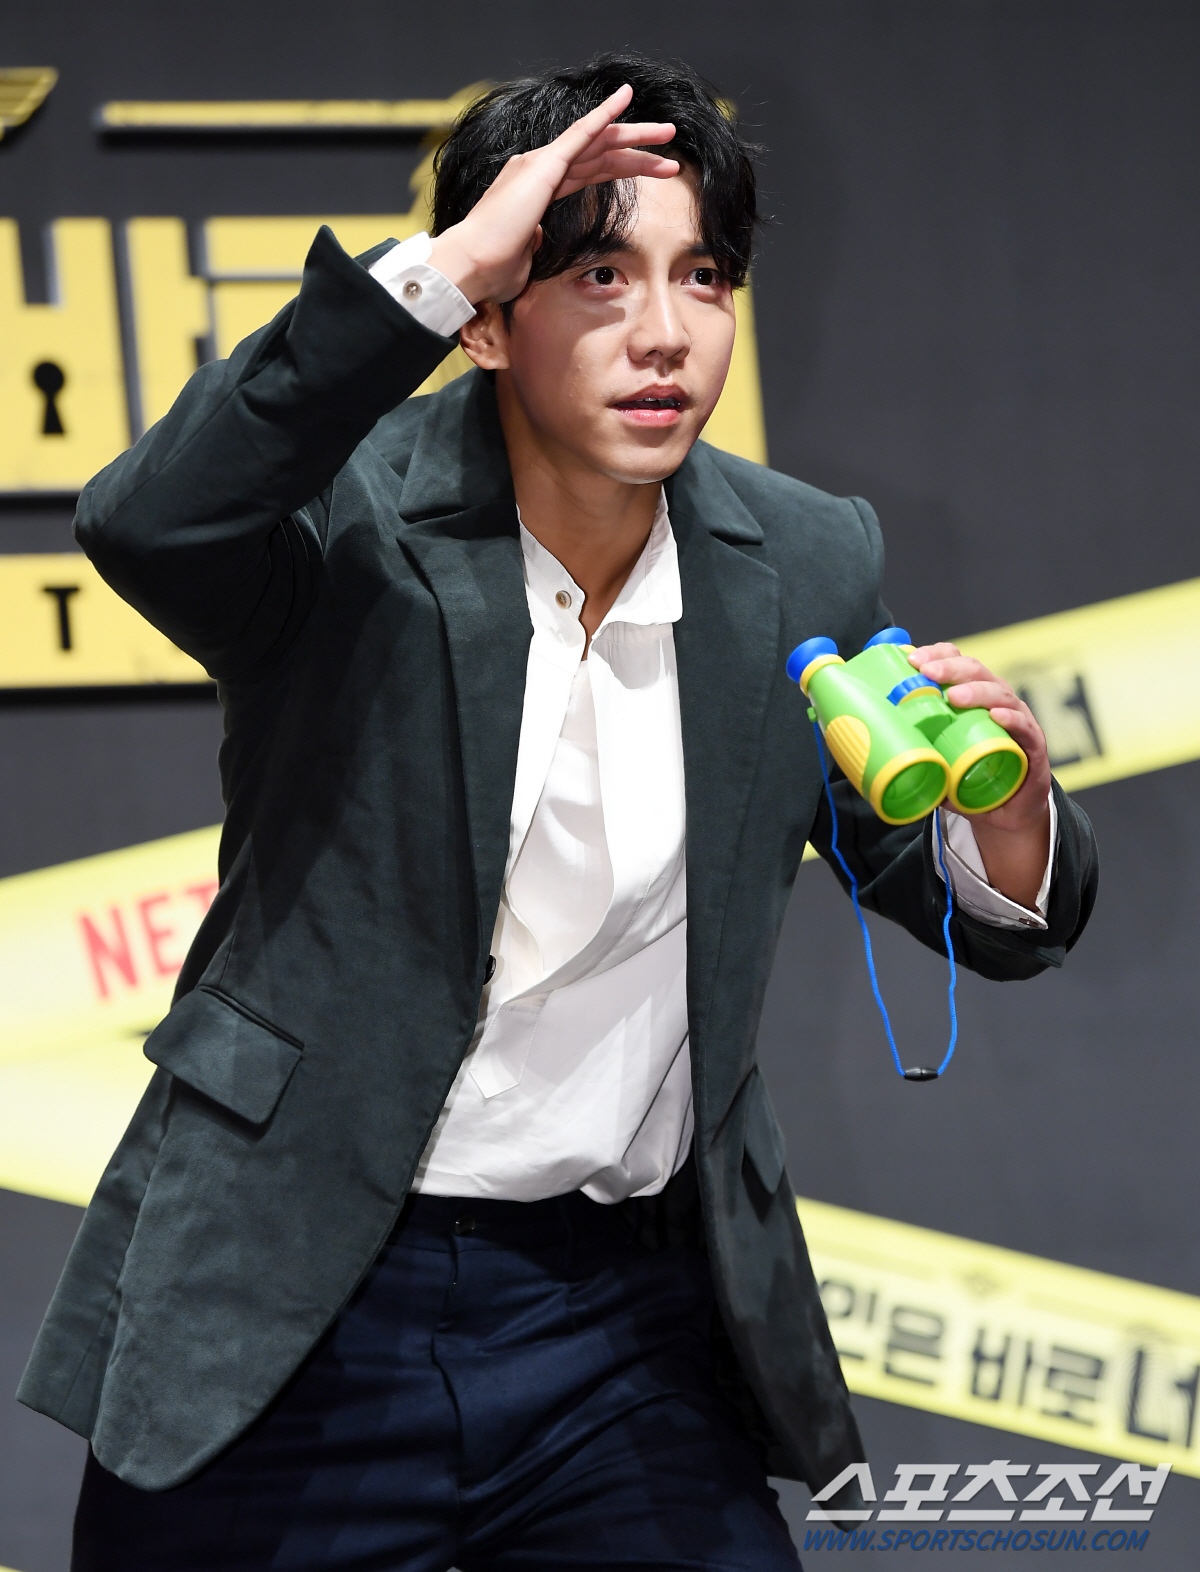 Lee Seung-gi has expressed his feelings for joining Bumbaner 2.On the morning of the 8th, the production presentation of Netflixs original Youre the Whole (hereinafter referred to as Bumbaner 2 was held at CGV in Apgujeong, Gangnam-gu, Seoul.The event was attended by Yoo Jae-Suk, Kim Jong-min, Lee Seung-gi, Park Min-young, Sehun, Sejeong, Cho Hyo-jin PD, Kim Joo-hyung PD and Kim Dong-jin PD.Lee Seung-gi, who joined Season 2, said: I was so good, I was excited to hear that I could be with too good members.Jae-seok wanted to meet him on the show, but hes been shooting it for the first time since X-Men. Hes been shooting with lots of actors and fun.Minyoung seems to have got a strong friend while together this time. Minyoung solves a lot of problems. It is not Tikitaka but Tittiti .Sehun is a brother who has become too close to this pro and Sejeong is the warmth of getting his youngest brother. Bumbaner 2 is an entertainment program that deals with the full-fledged life variety of the Monk Dan, which is busy with hands and feet because Murder, She Wrote are busy. Guests who will shine episodes with the Monk Dan will appear and add strength to Murder, She Wrote entertainment.In addition to Yoo Jae-Suk, Kim Jong-min, Park Min-young, Sehun, and Sejeong, who have been together since last season, Lee Seung-gi will join the Monk lineup and hope to show extraordinary Murder, She Wrote ability.Bumbaner 2 has released past-class guests before the broadcast.B1A4 camp, Lim Won-hee, Kim Min-jae, Park Jin-joo, intern Monk, Jin Se-yeon, Shin A-young and Hani will join.Bumbaner 2 will be released worldwide on Netflix on Saturday.